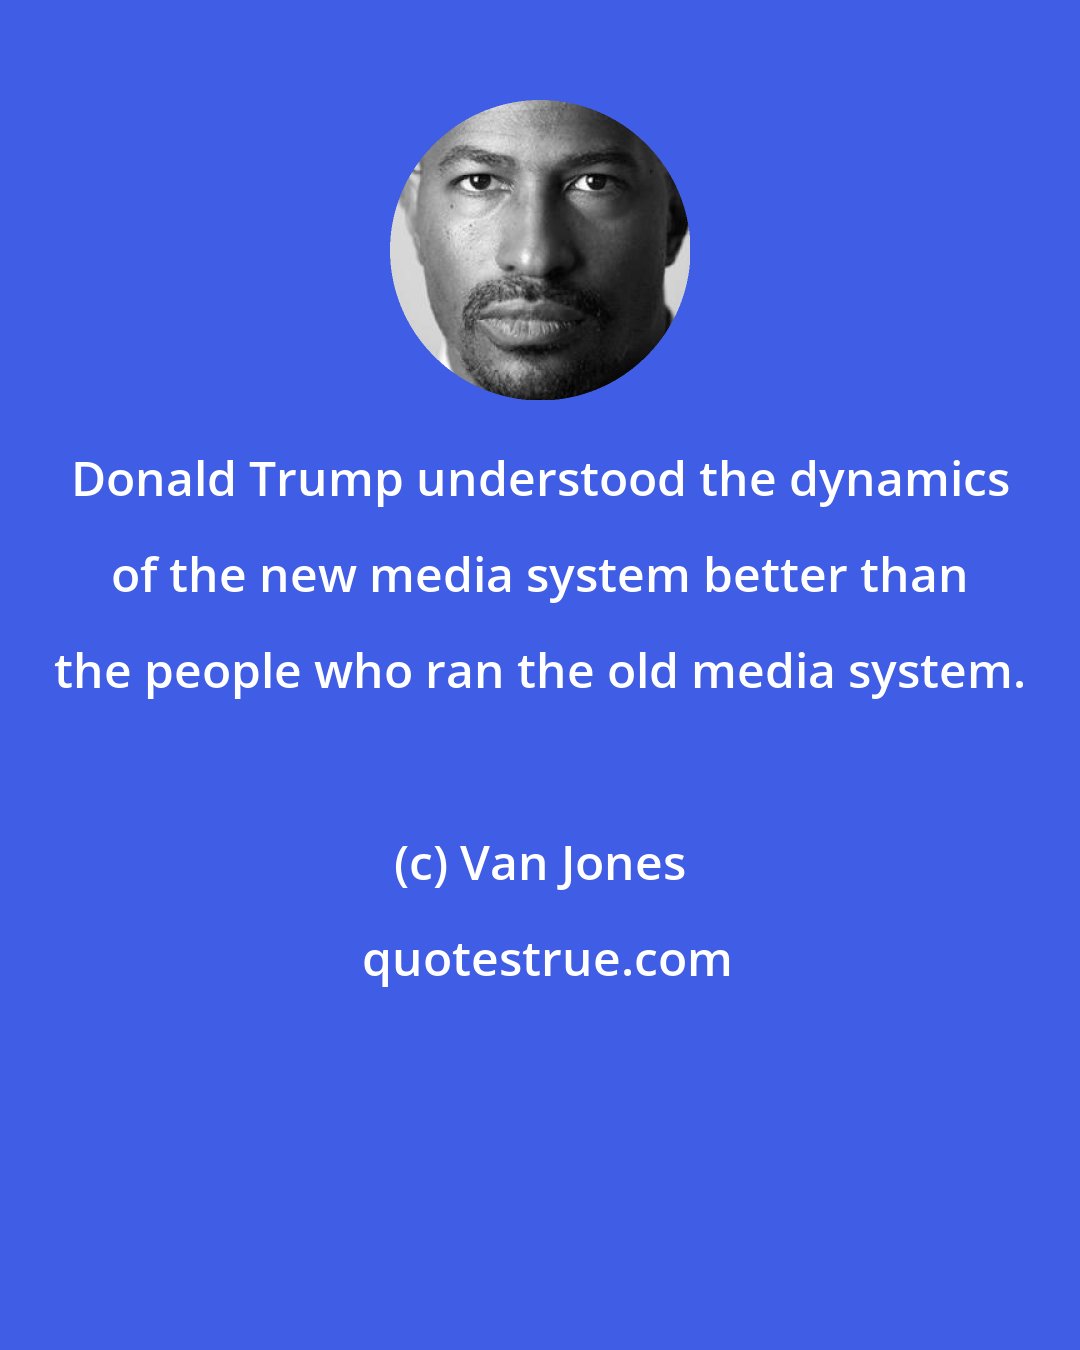 Van Jones: Donald Trump understood the dynamics of the new media system better than the people who ran the old media system.